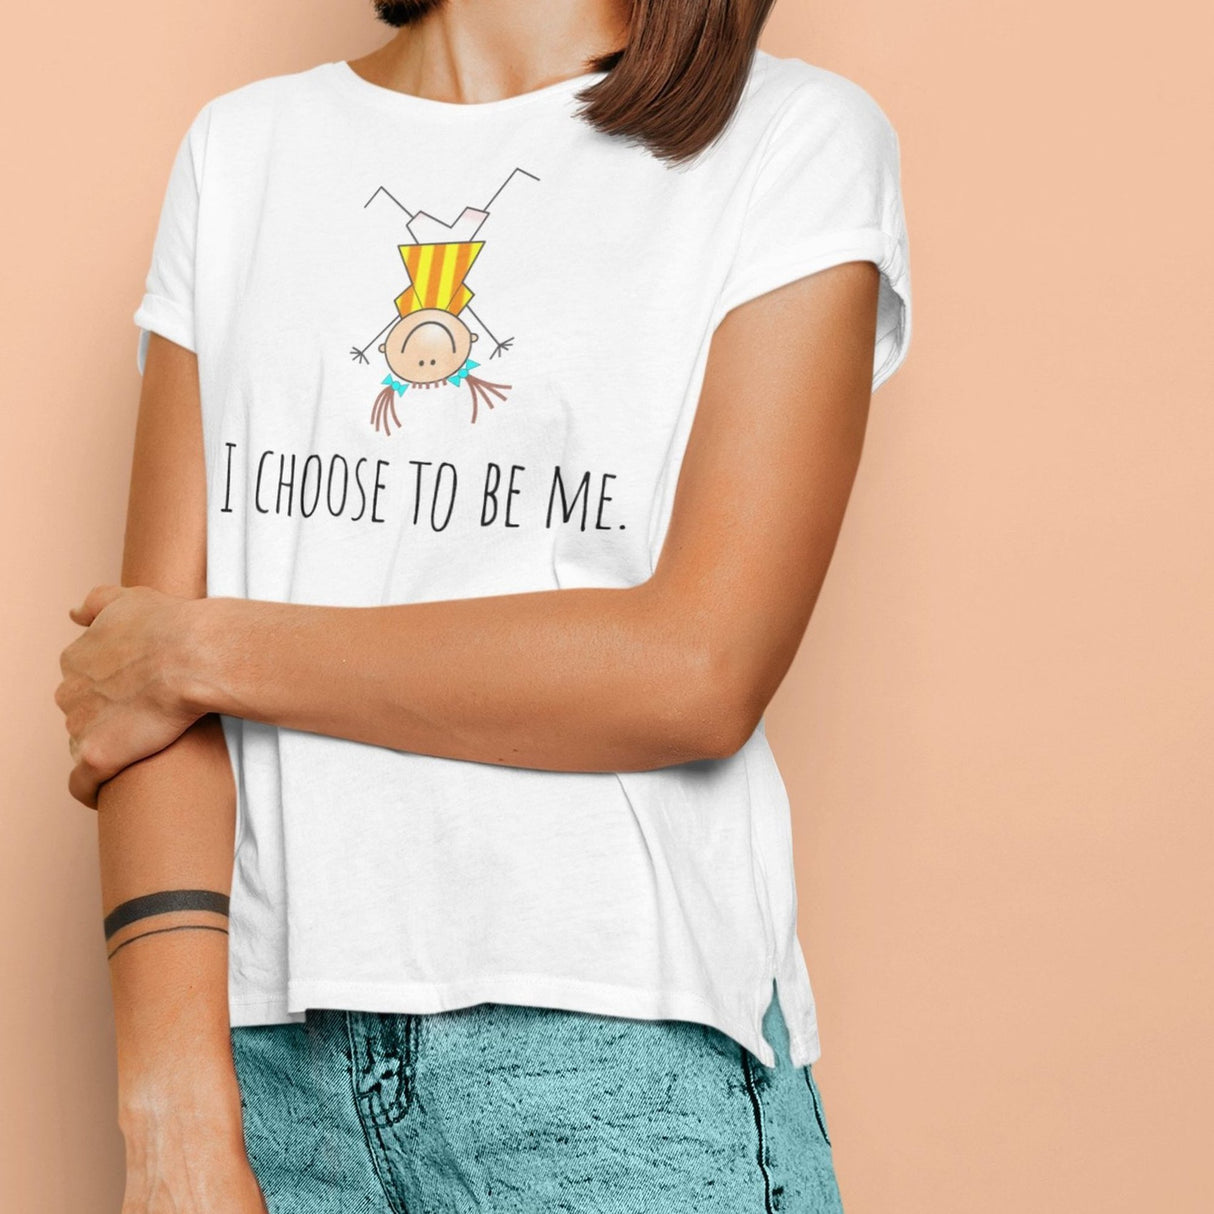 i-choose-to-be-me-happy-tee-choose-t-shirt-cool-tee-inspirational-t-shirt-lgbt-tee#color_white